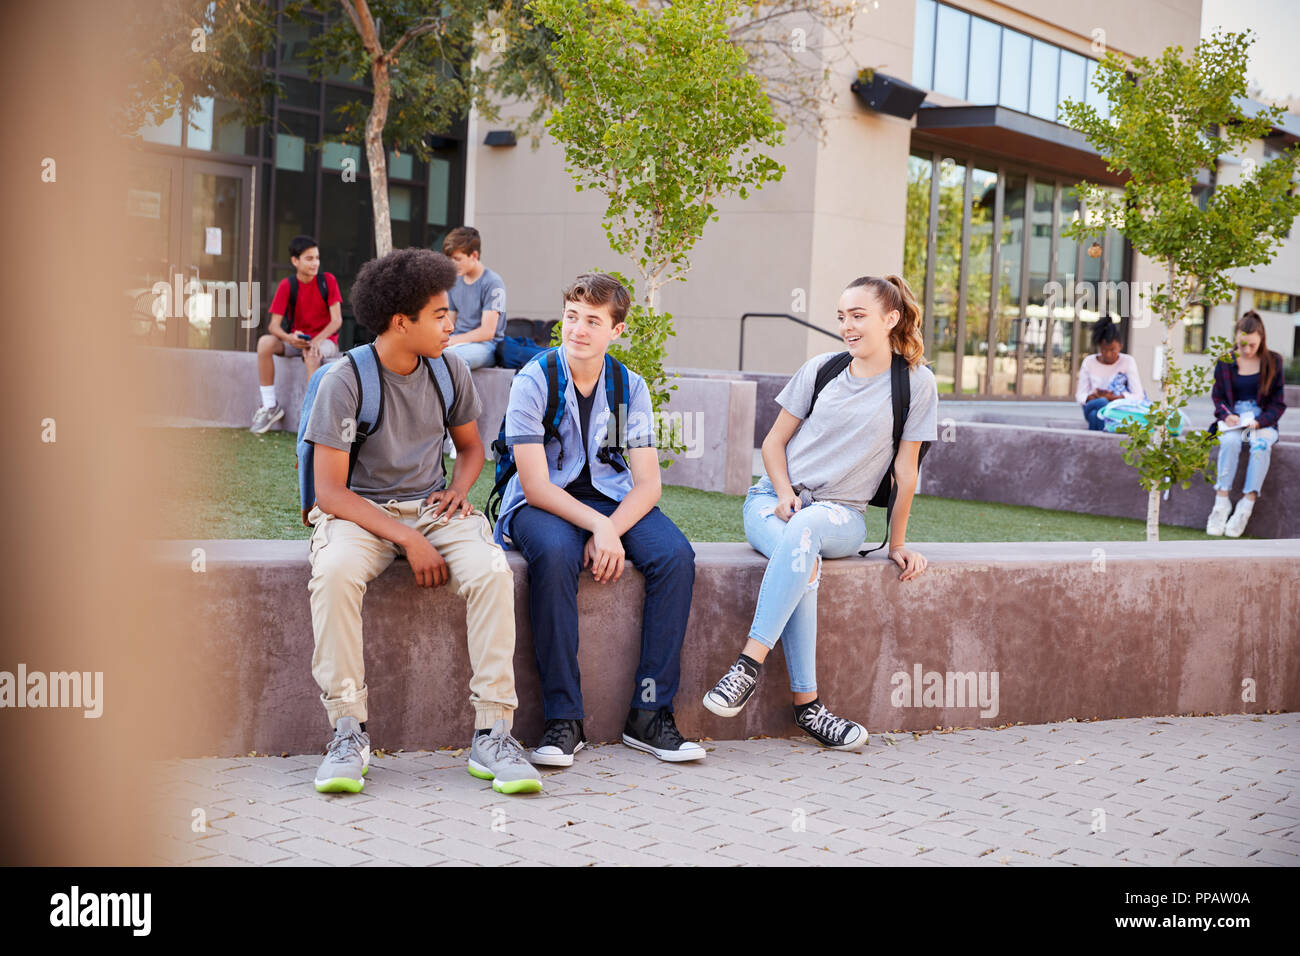 Group Of High School Students Hanging Out During Recess Stock Photo